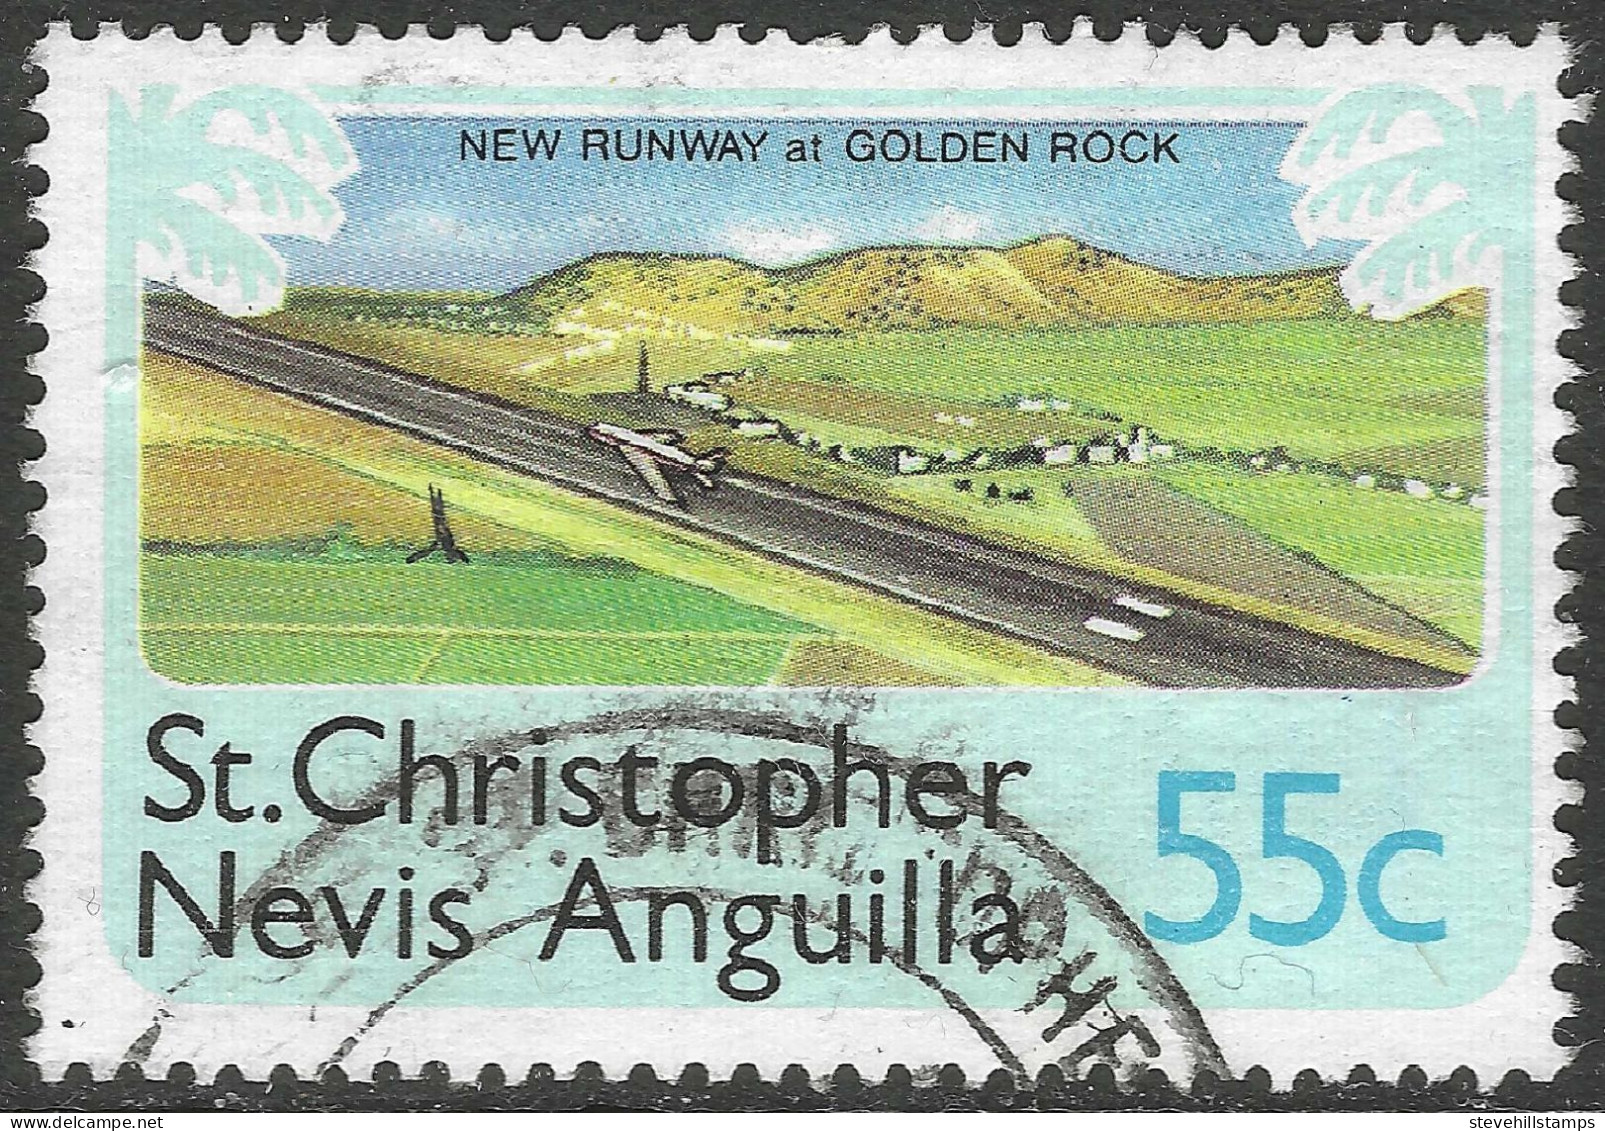 St Kitts-Nevis. 1978 Definitives. 55c Used. SG 403. M3147 - St.Cristopher-Nevis & Anguilla (...-1980)